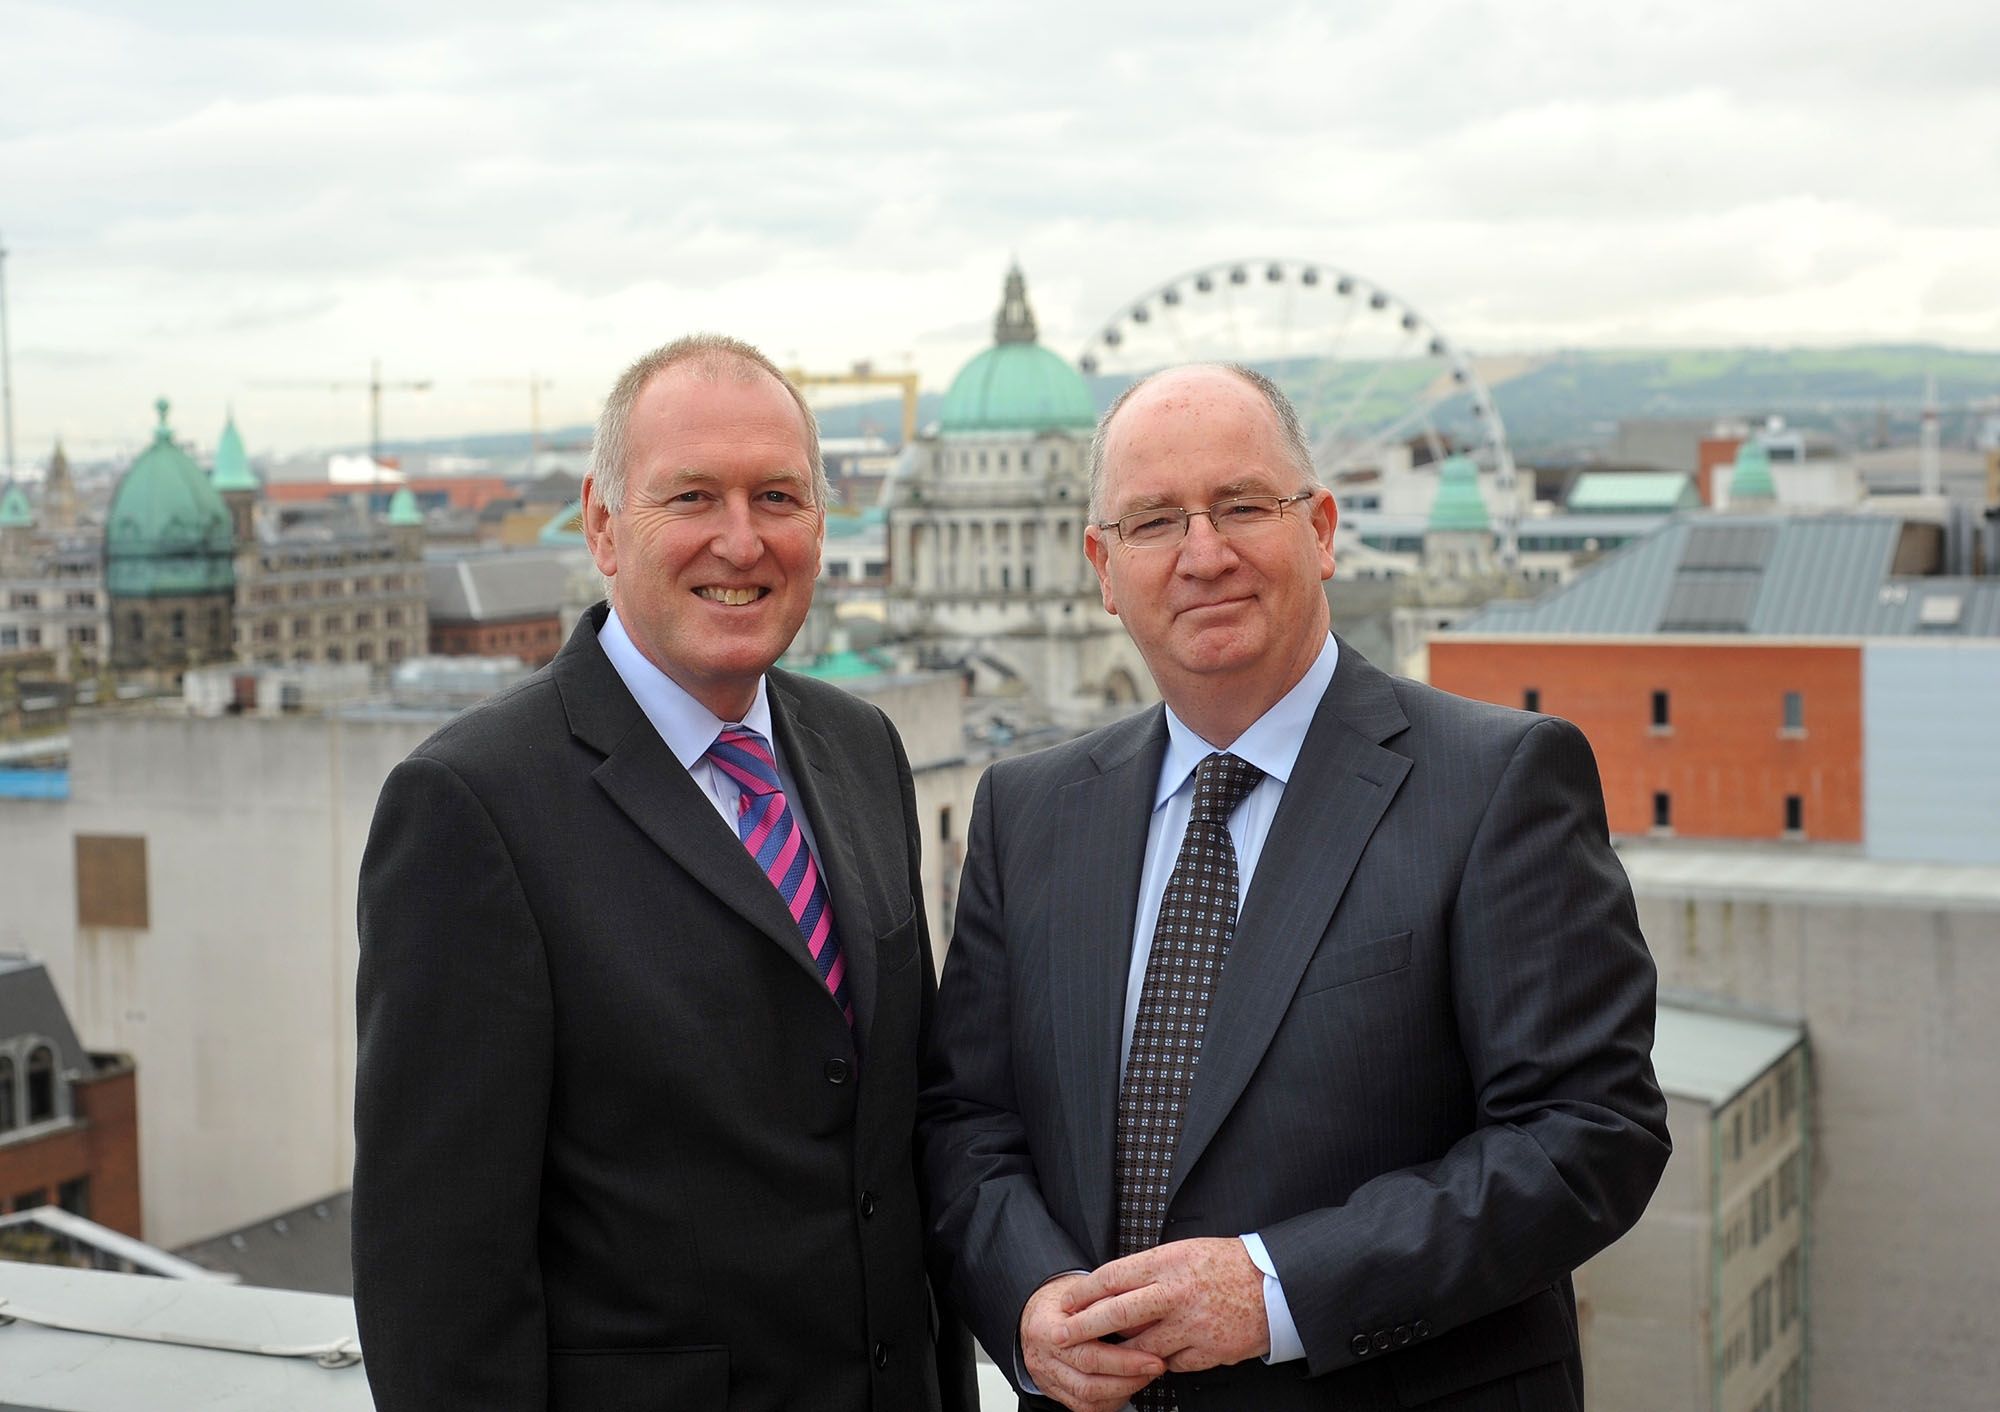 Paul Googins MP and Dr Michael Maguire